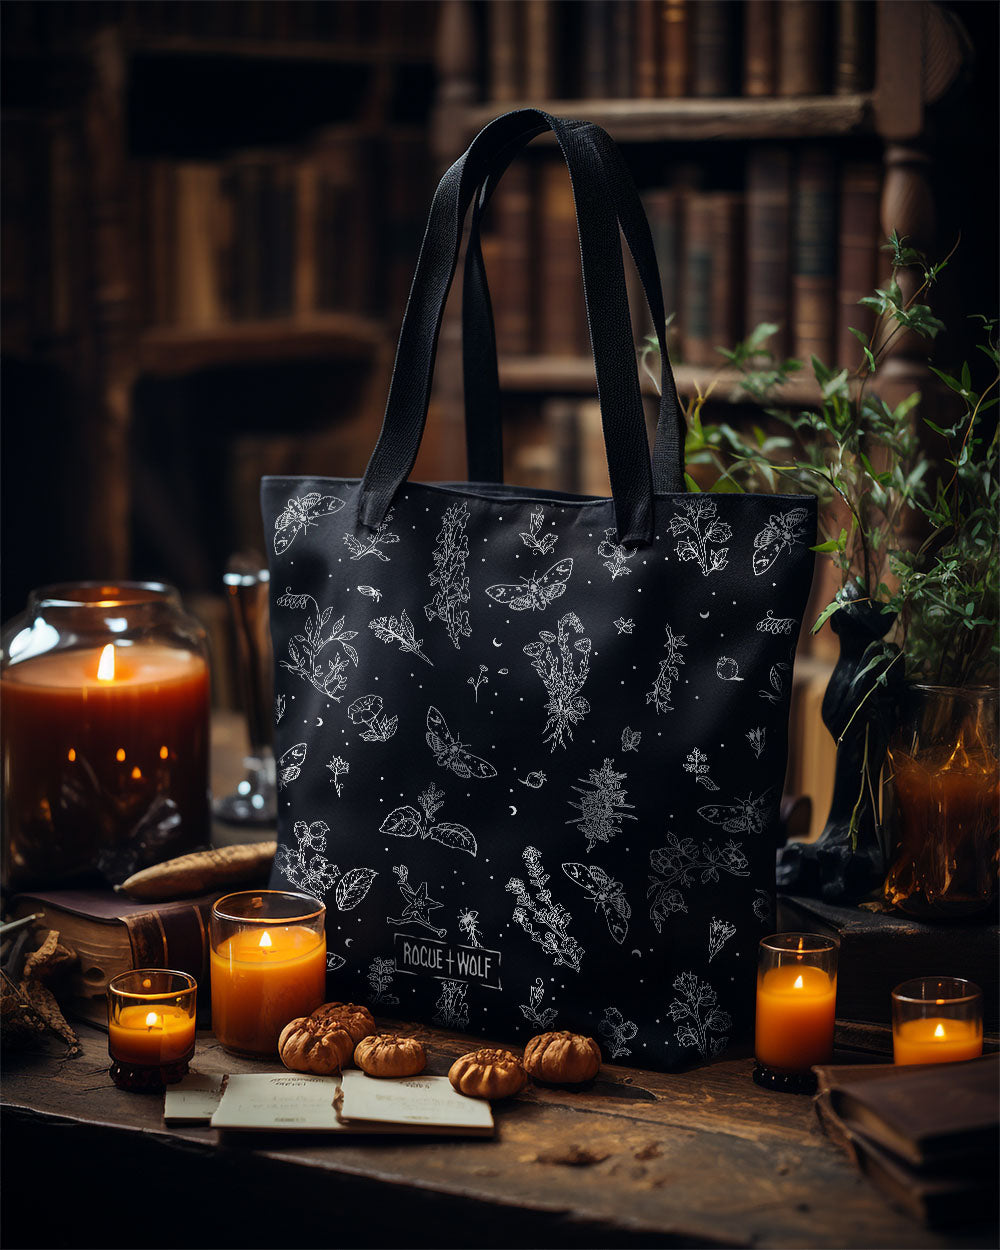 Crystal Queen Vegan Tote Bag - Witchy Goth Large Foldable & Reusable Bag  for Travel Work Gym Grocery Cool Gothic Gifts